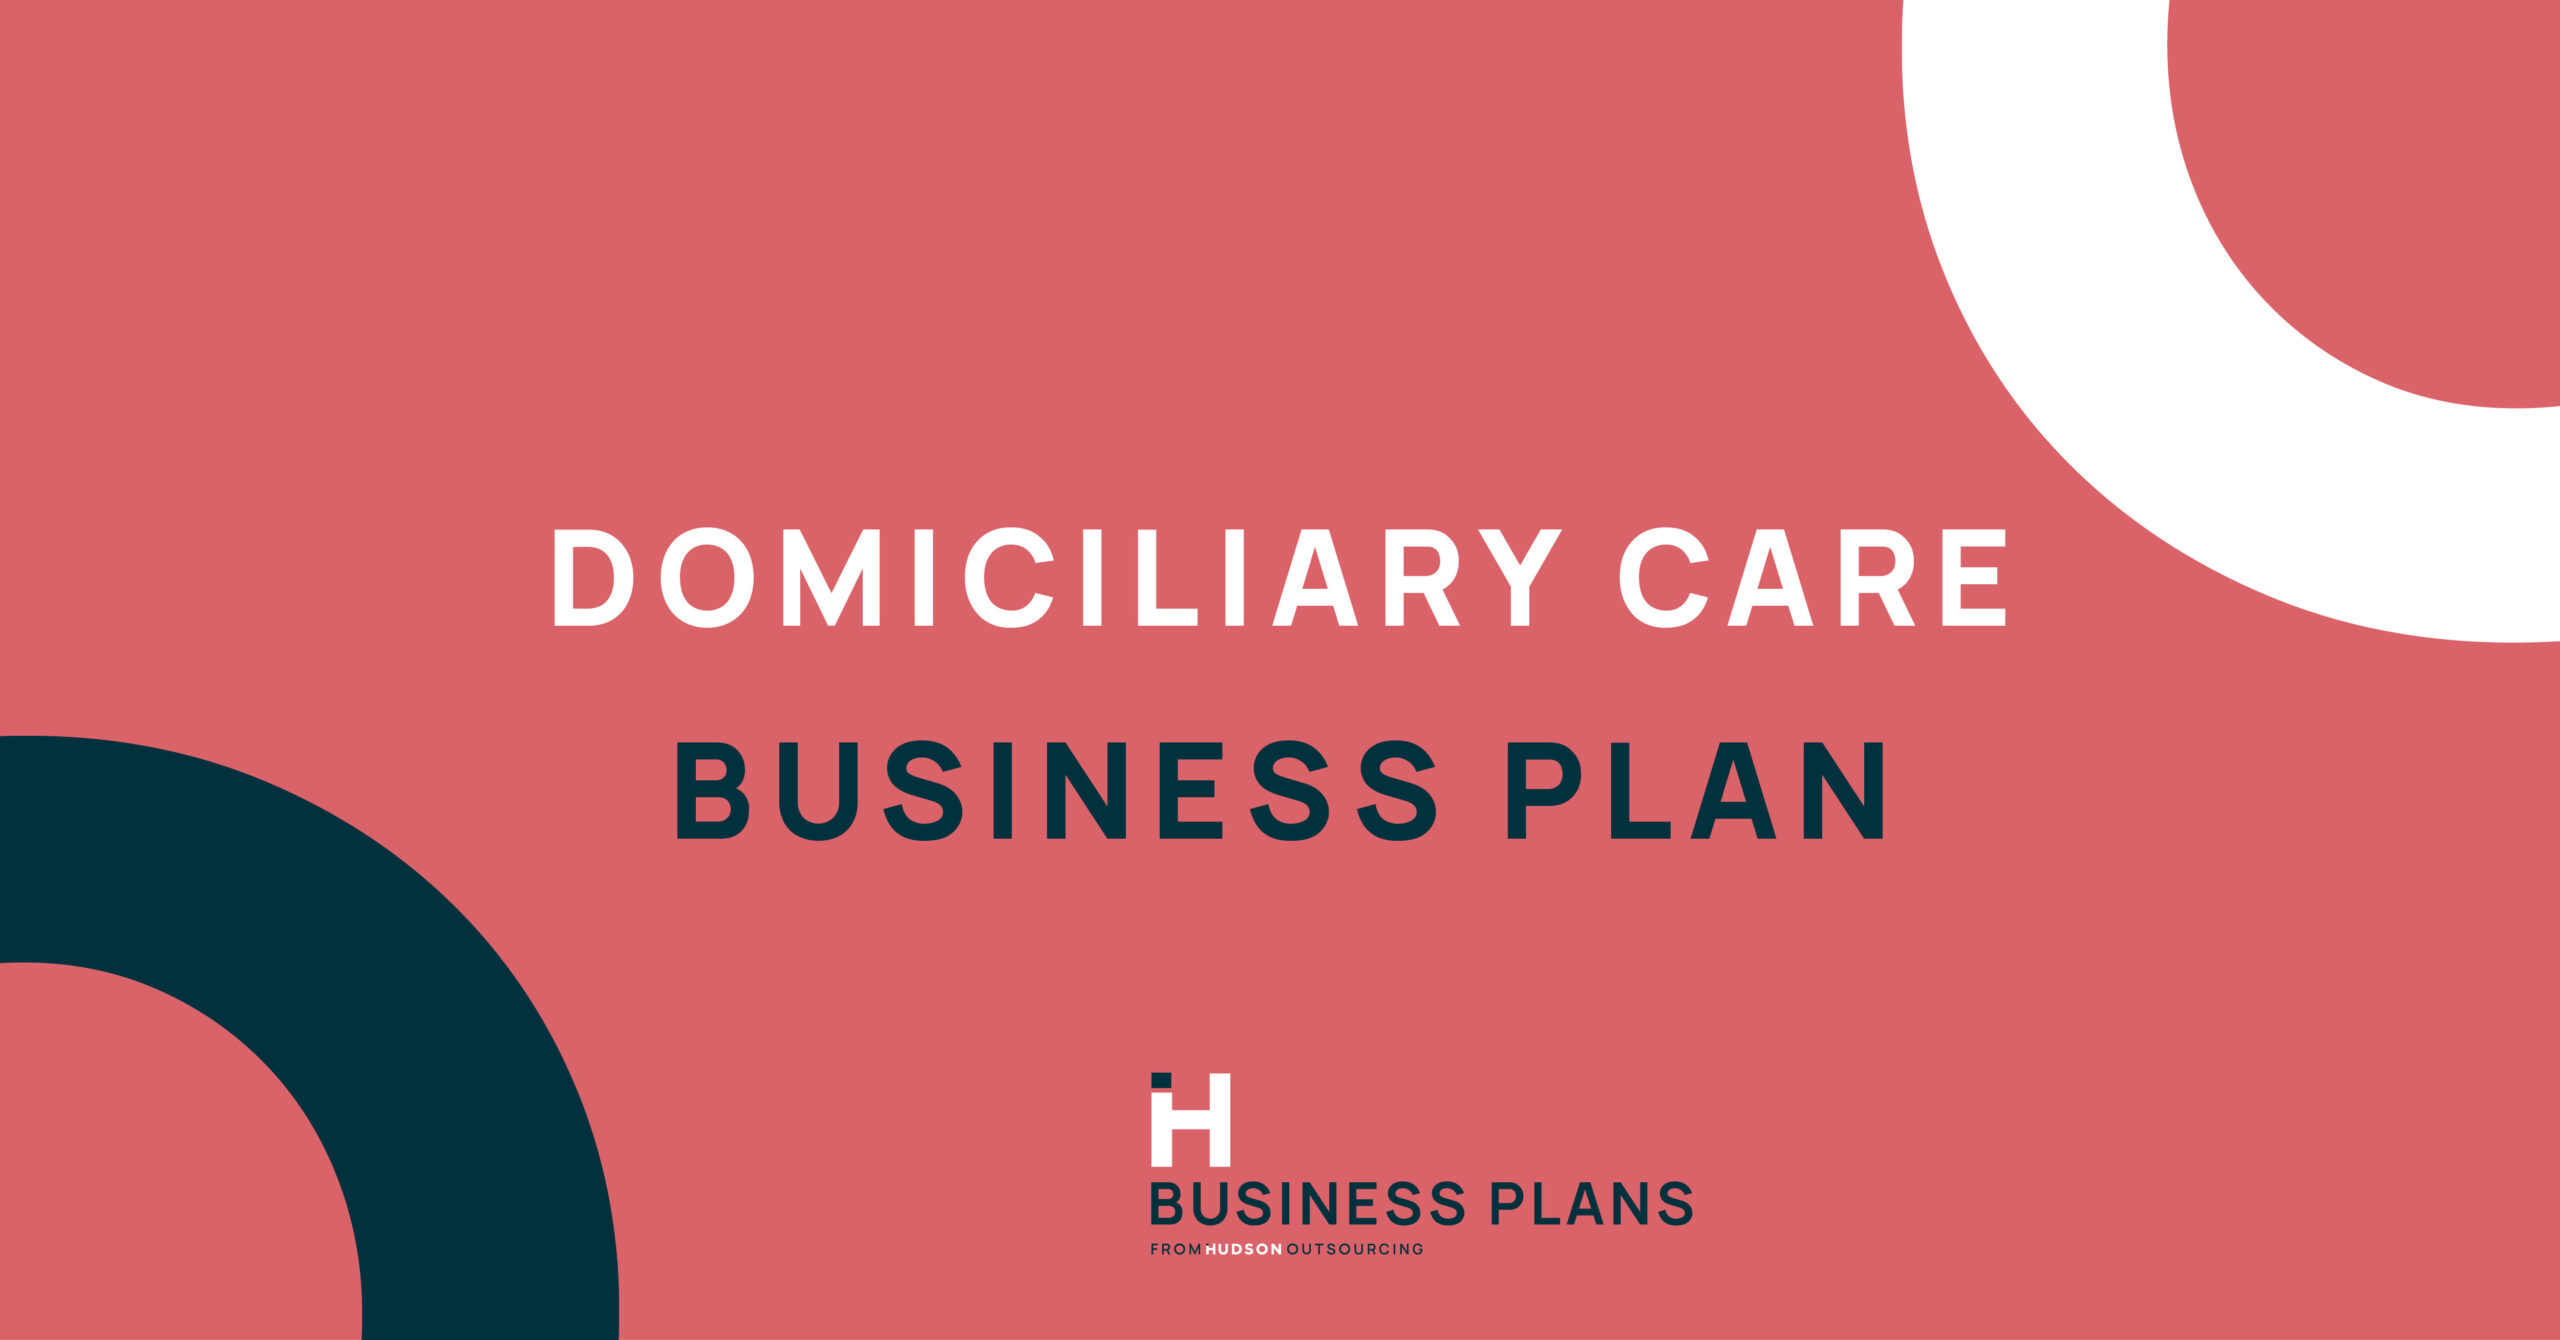 domiciliary care business plan example